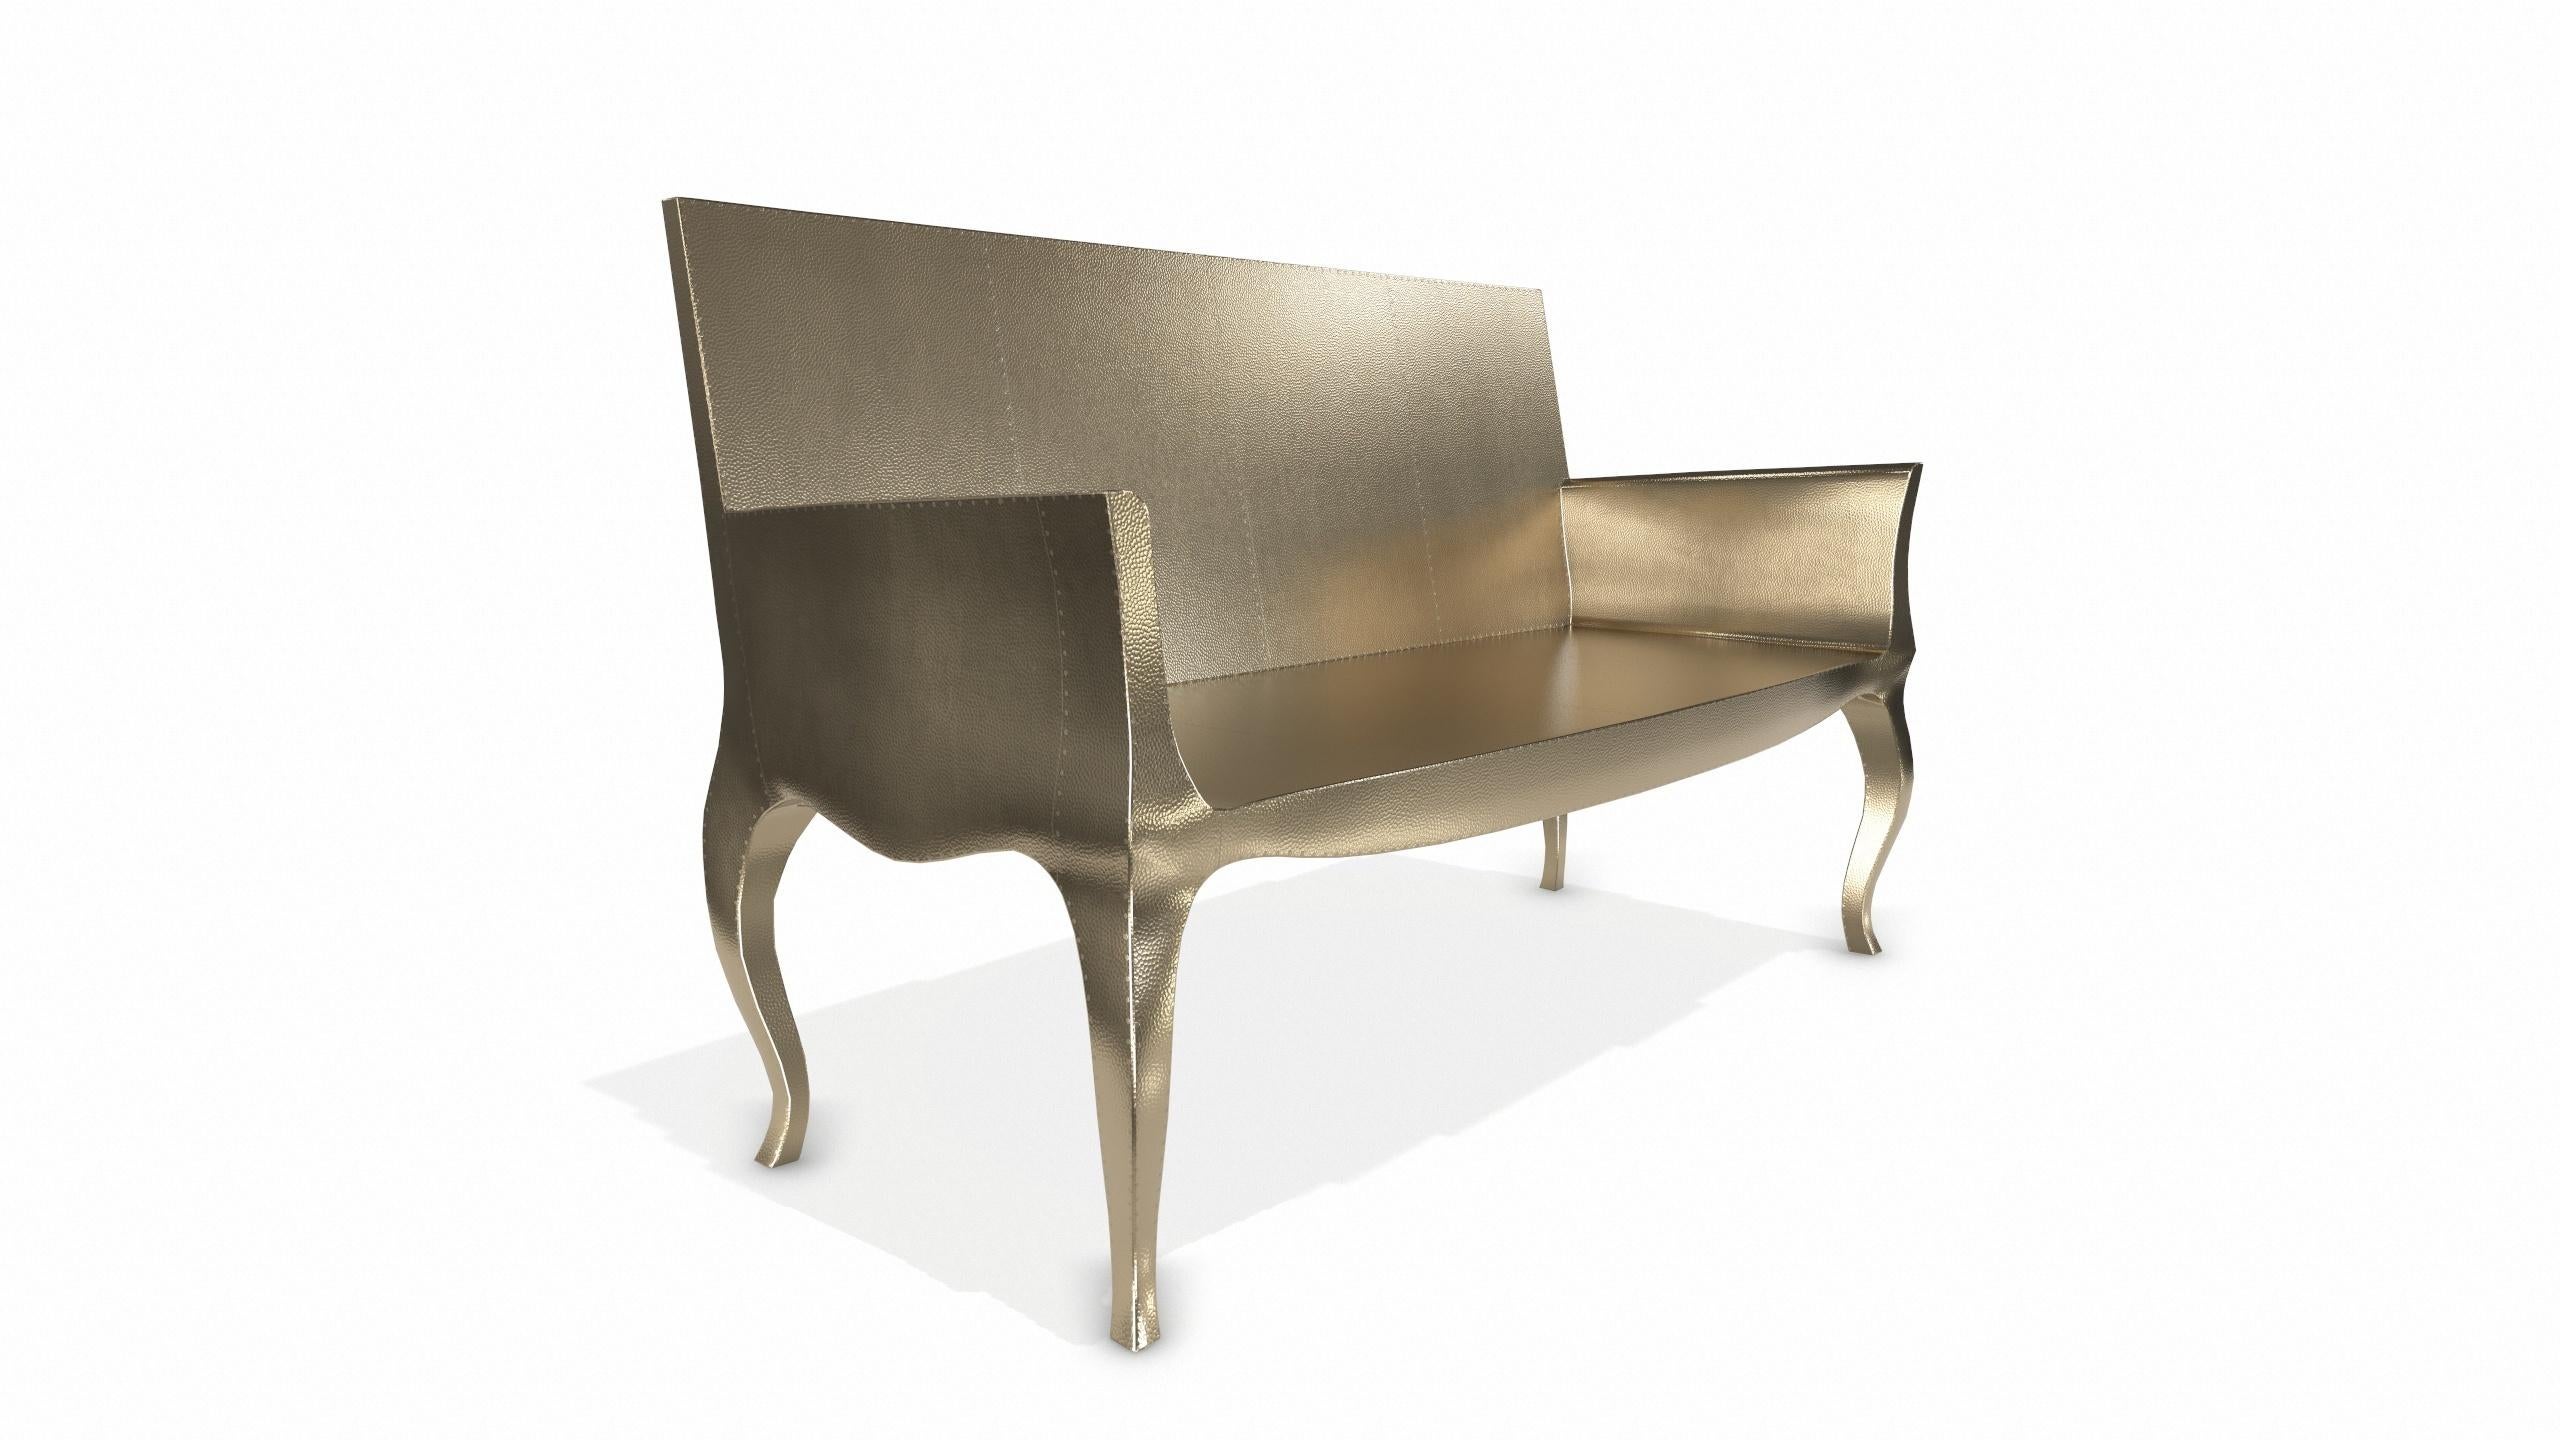 Louise Settee Art Deco Canapes in Mid. Hammered Brass by Paul Mathieu In New Condition For Sale In New York, NY